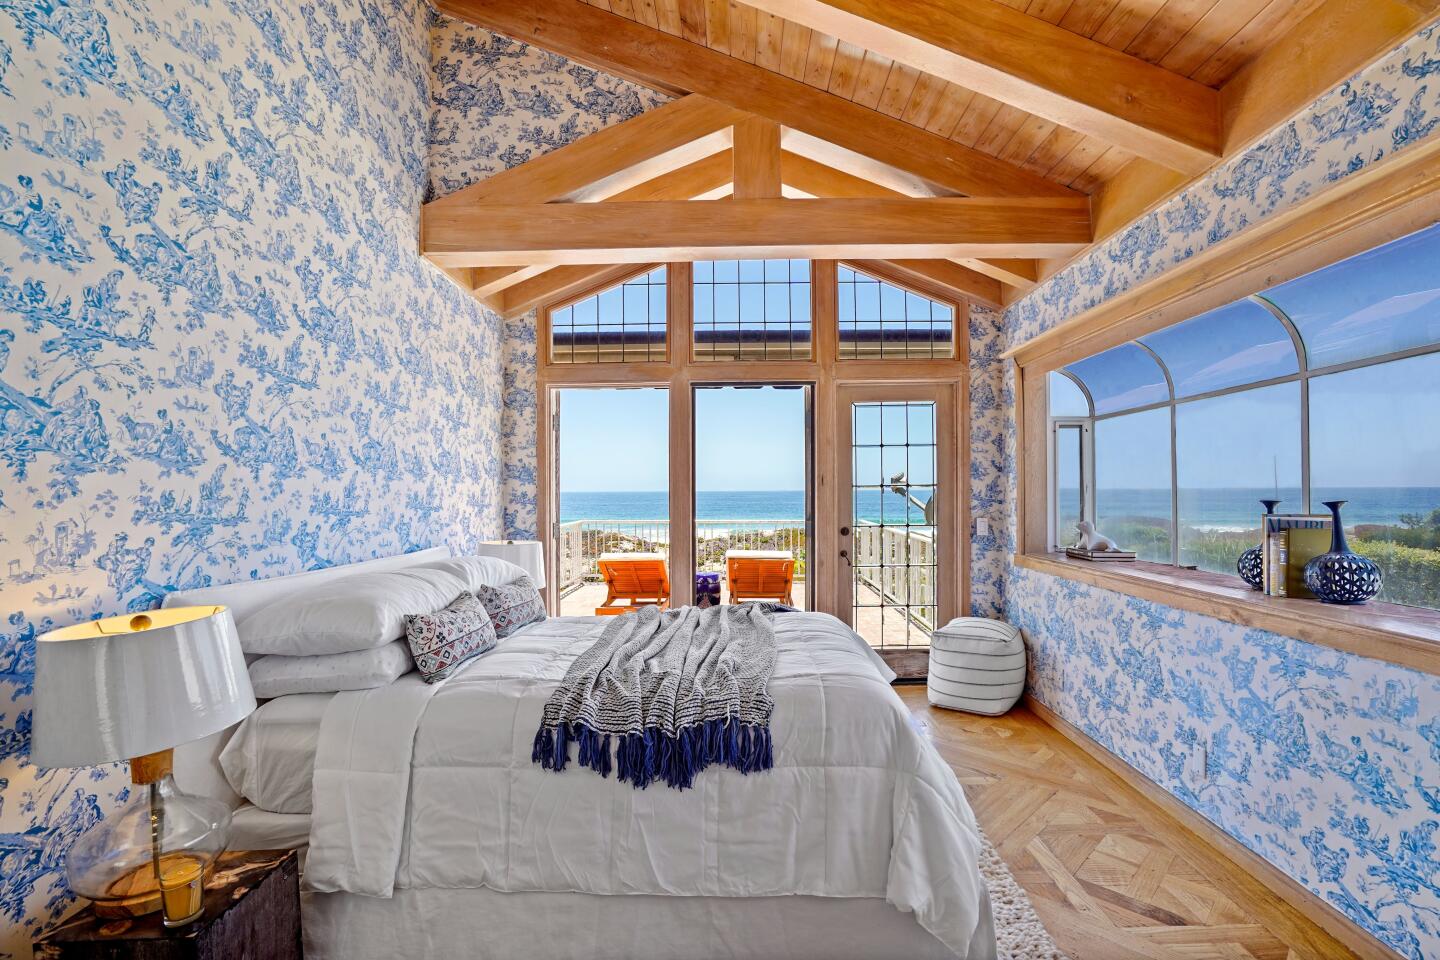 A bedroom has a bank of windows, a glass door, slopedceiling and blue and white walls.